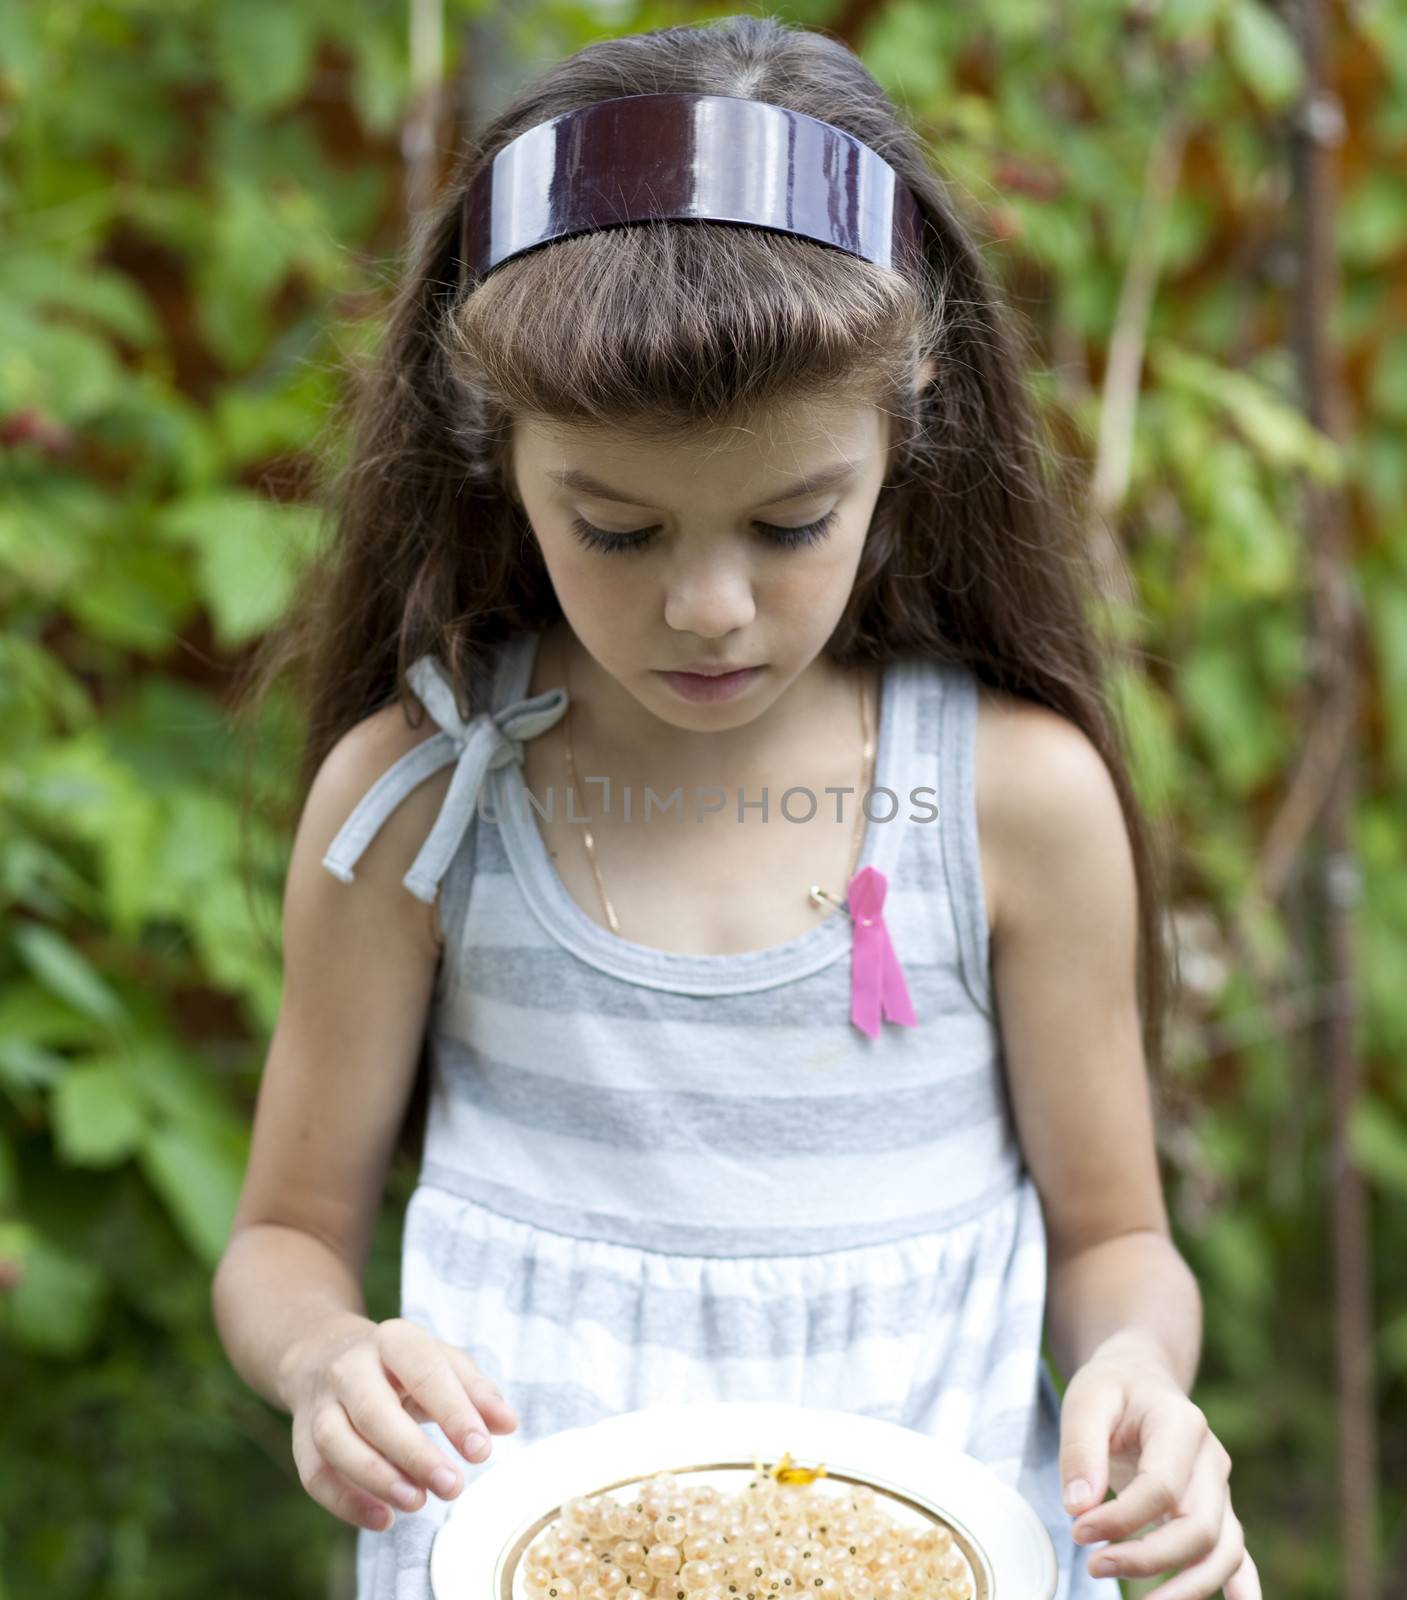 little girl holding a plate with a white currants by andersonrise